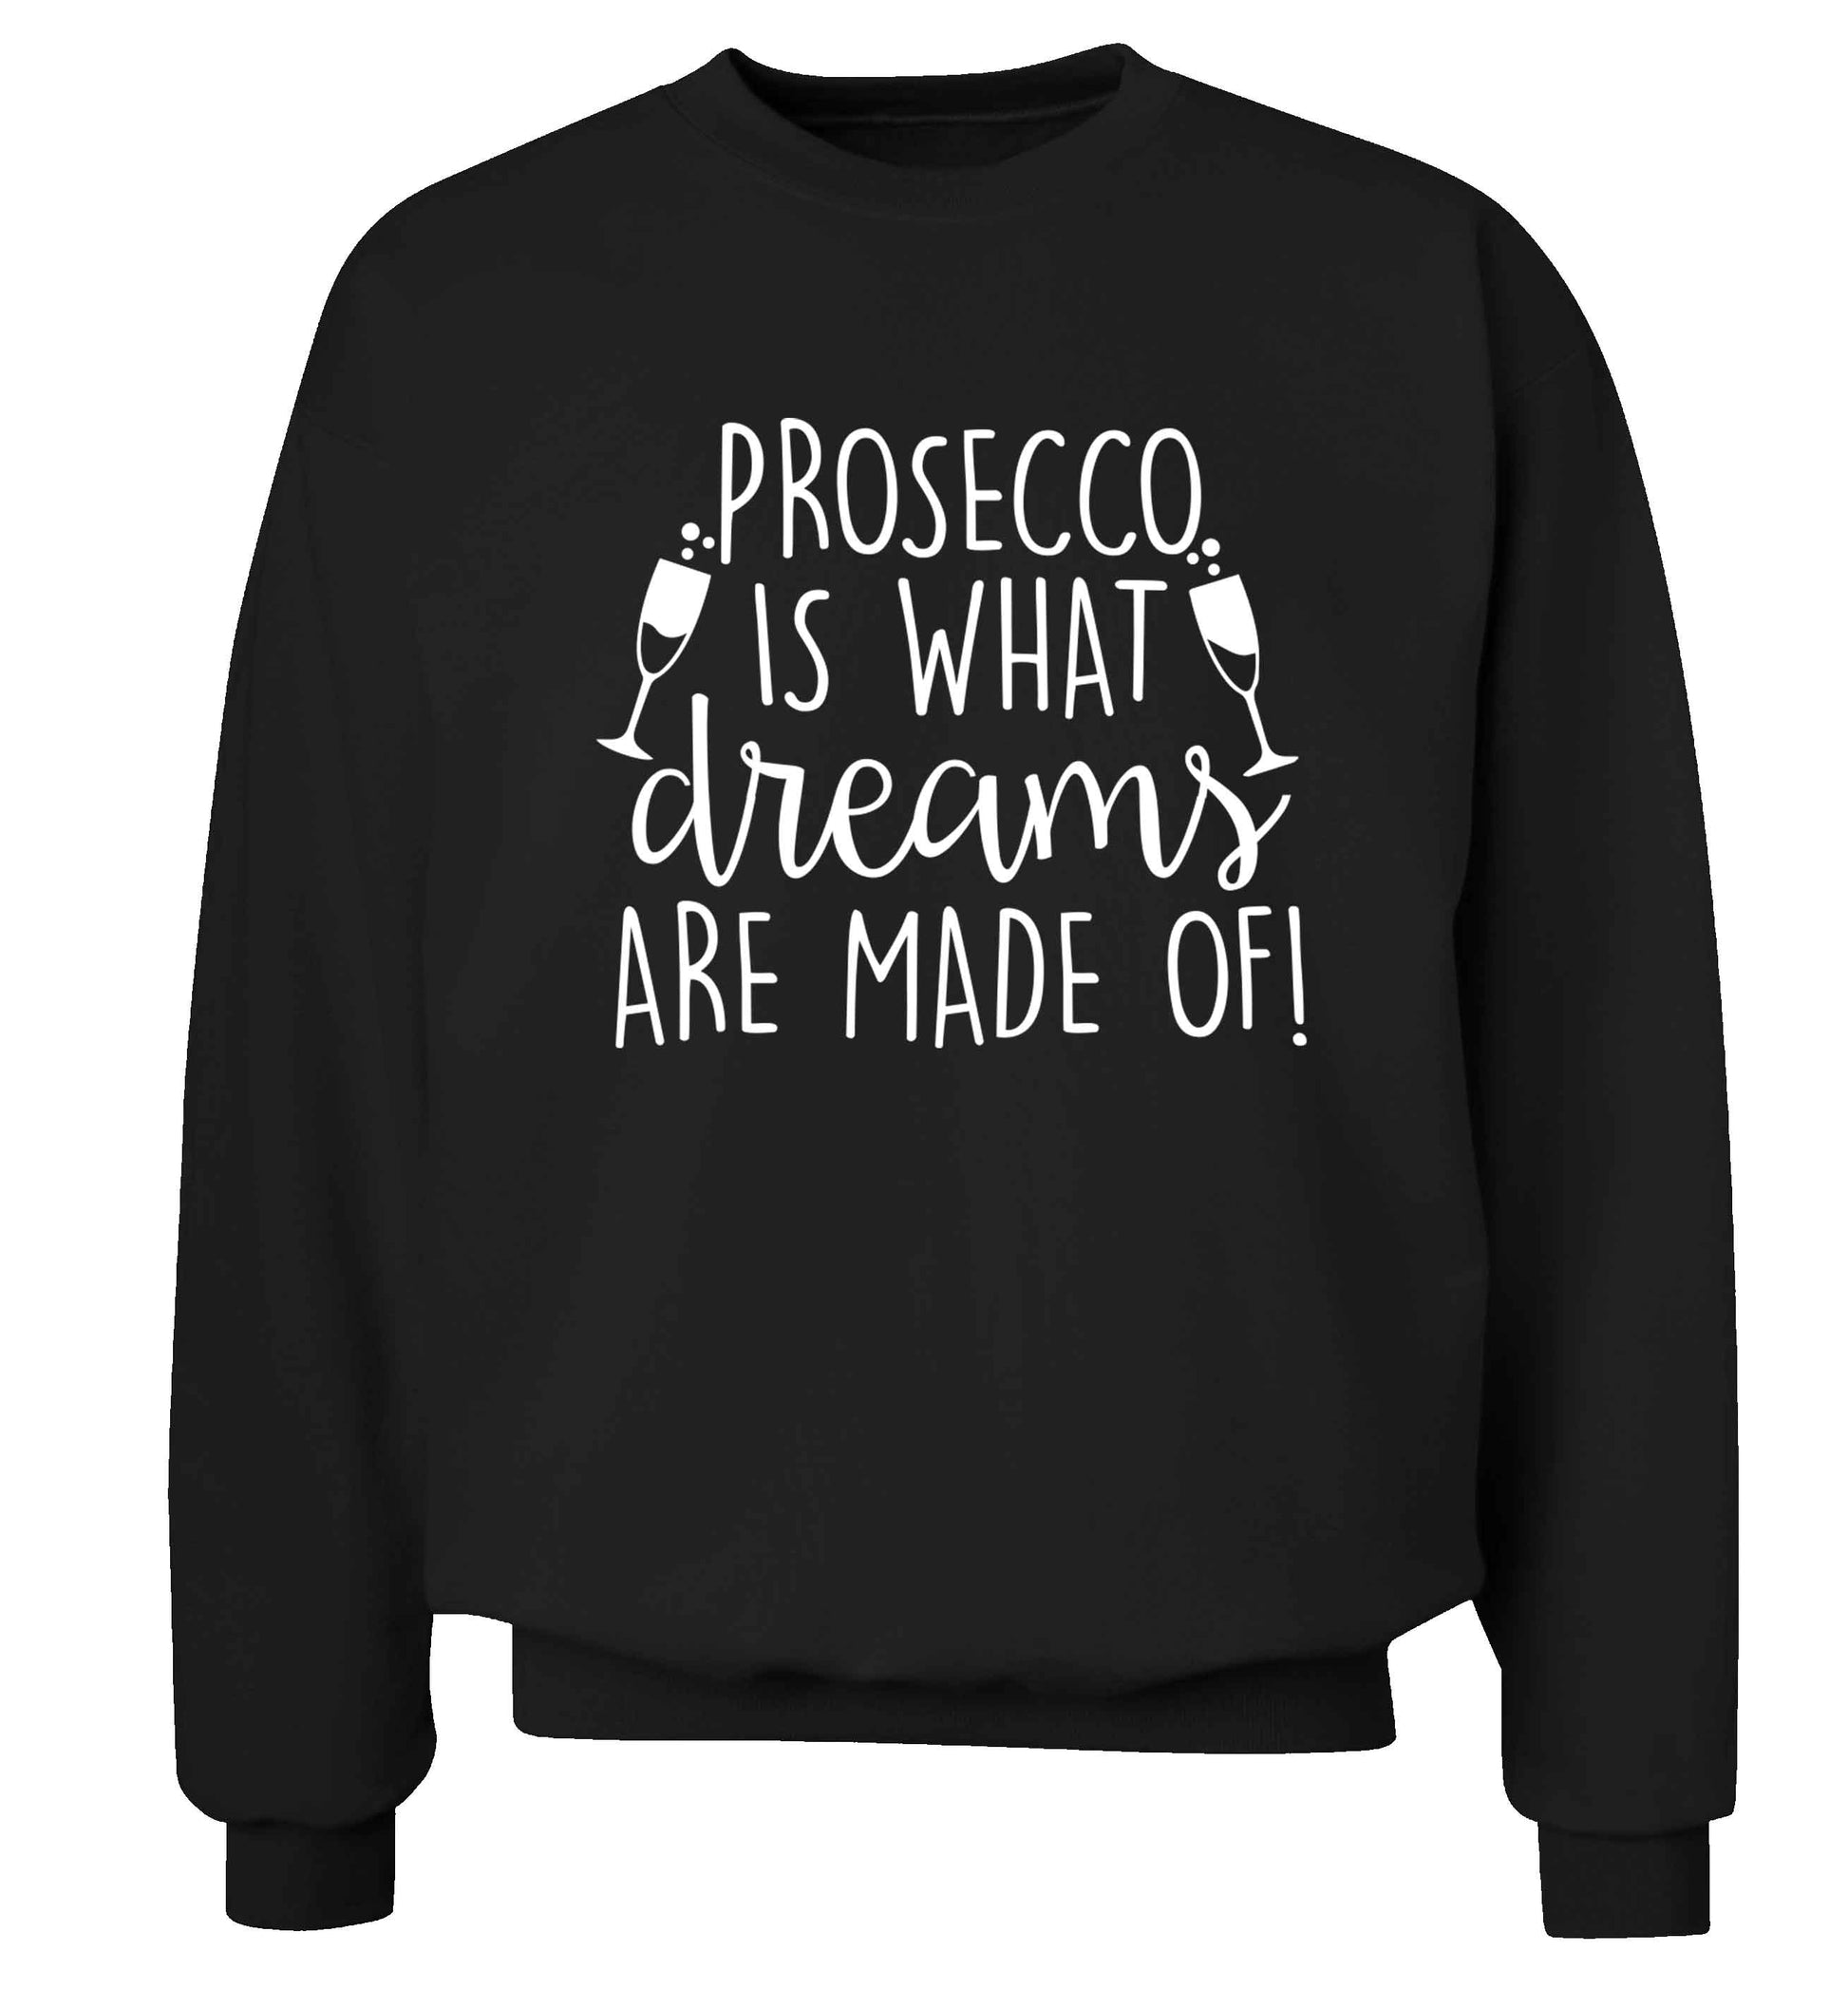 Prosecco is what dreams are made of Adult's unisex black Sweater 2XL